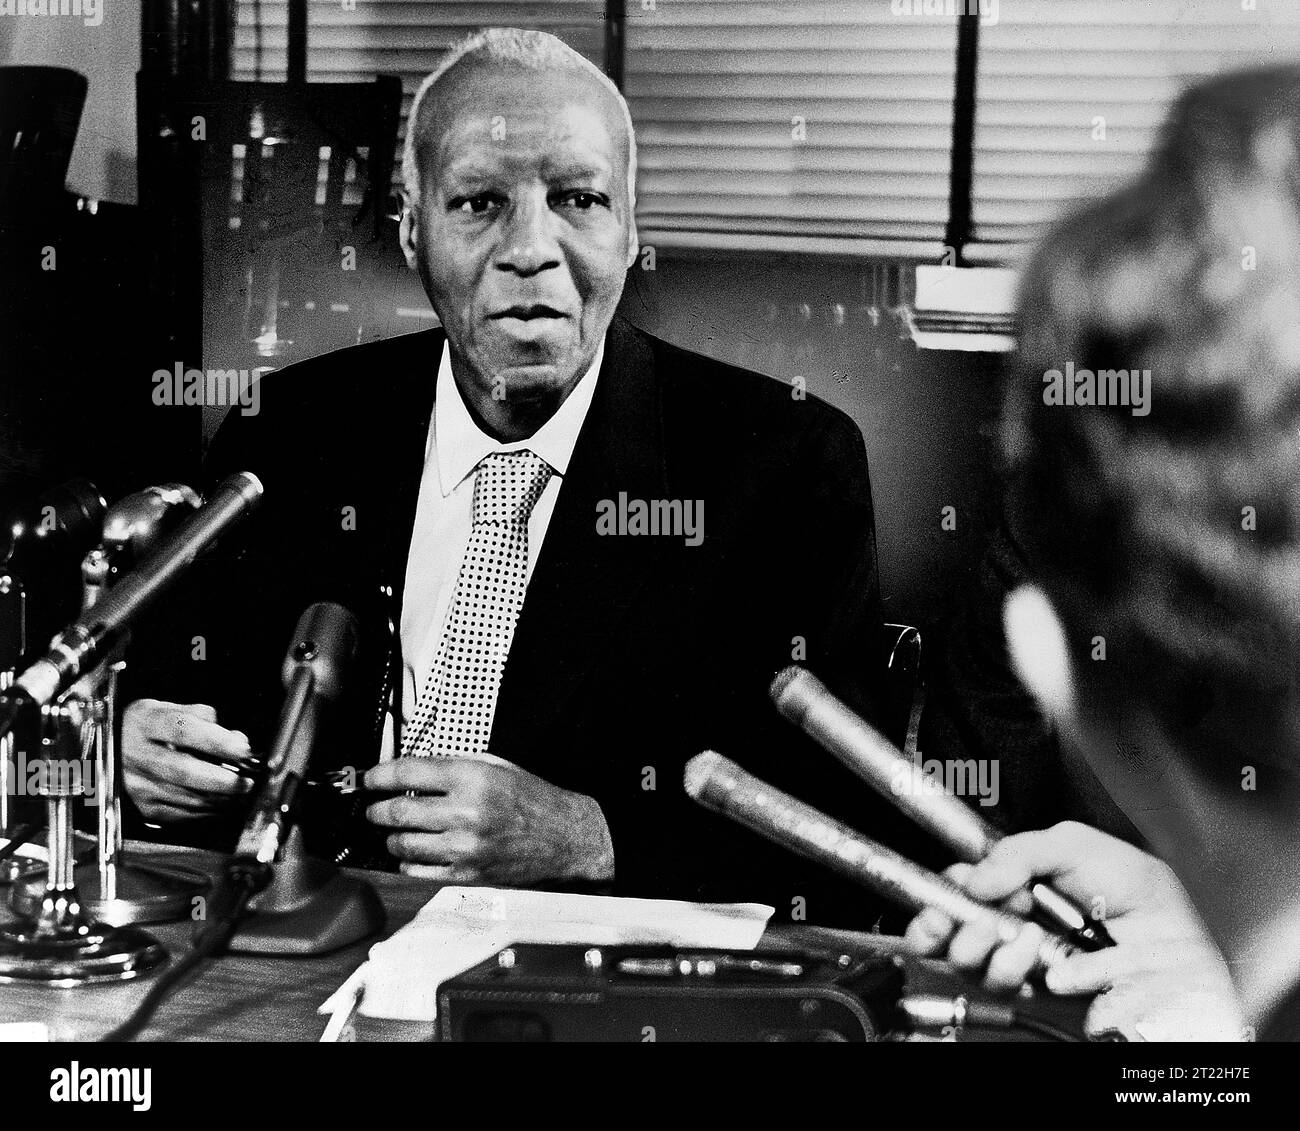 A. Philip Randolph (1889-1979), American labor unionist and civil rights activist, half-length portrait at microphones during press conference, Ed Ford, New York World-Telegram and the Sun Newspaper Photograph Collection, 1964 Stock Photo